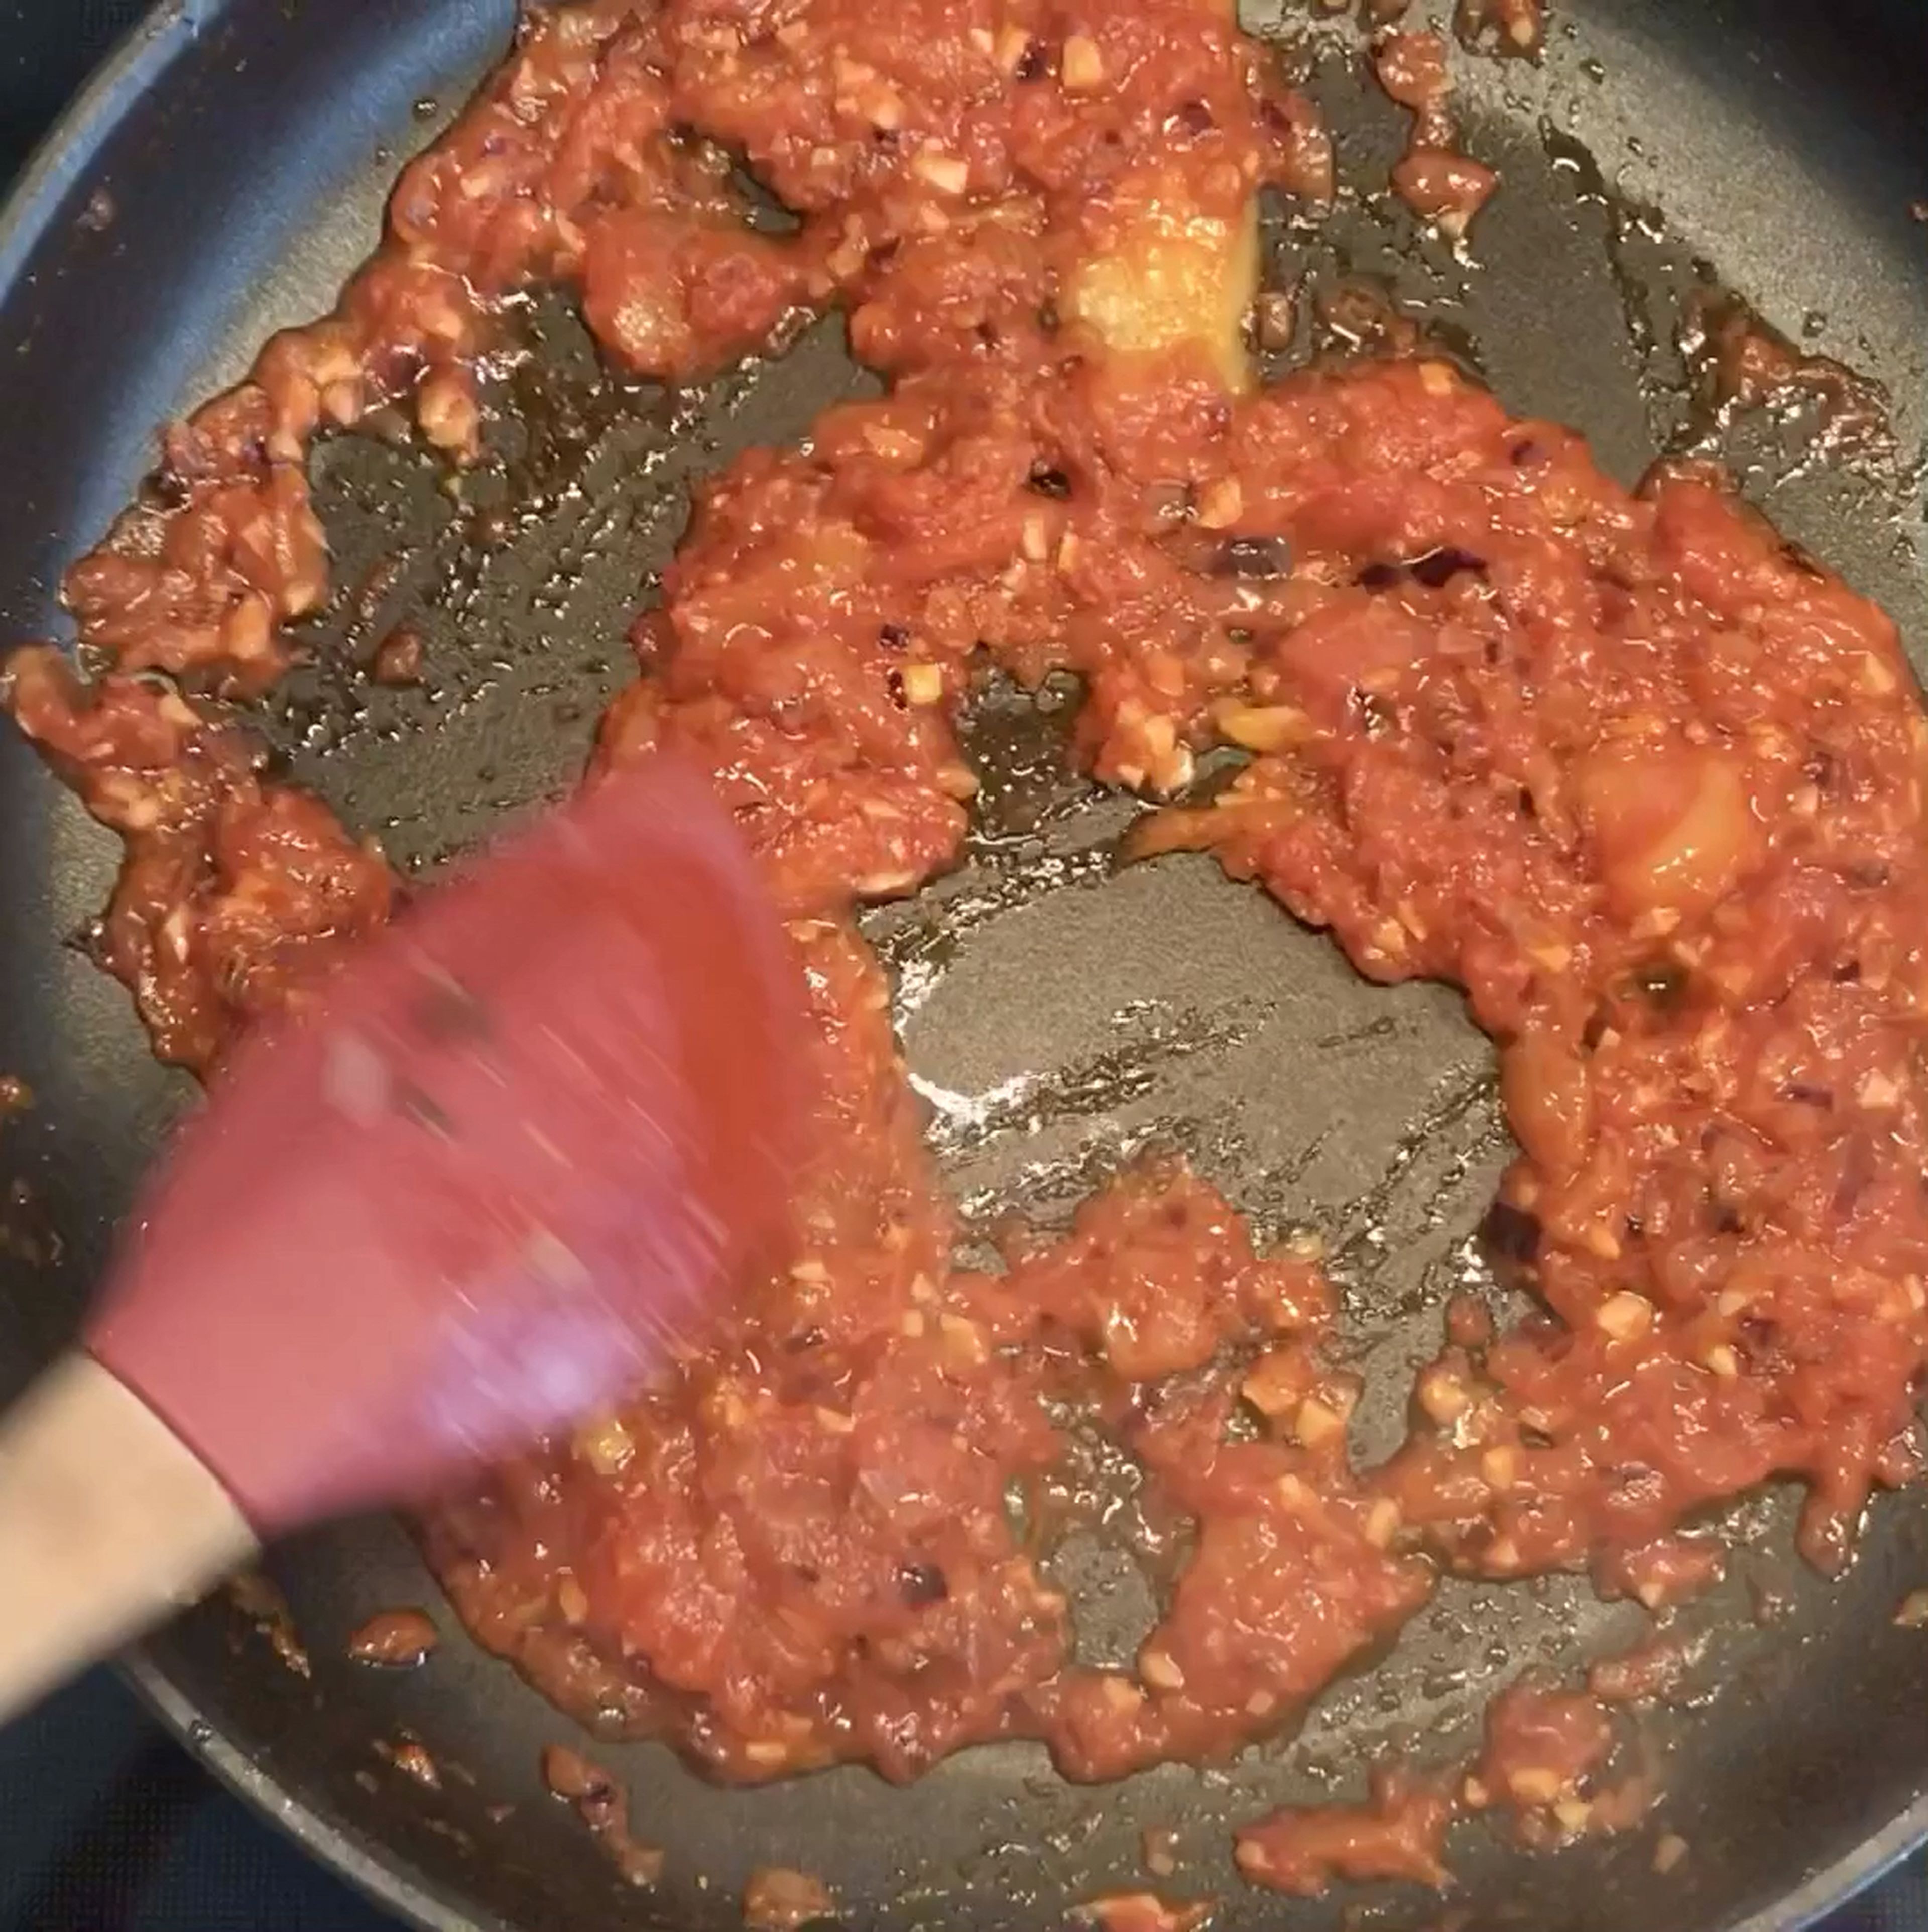 Add the drained whole tomatoes to the frying pan and break them up roughly using your spoon. Add chilli flakes, lemon zest, and tomato paste. Fry until most of the liquid has evaporated and the tomatoes are darker in colour, approx. 5 min. Add canned tomato liquid, stir through and let bubble, then bring the heat down to a gentle simmer.